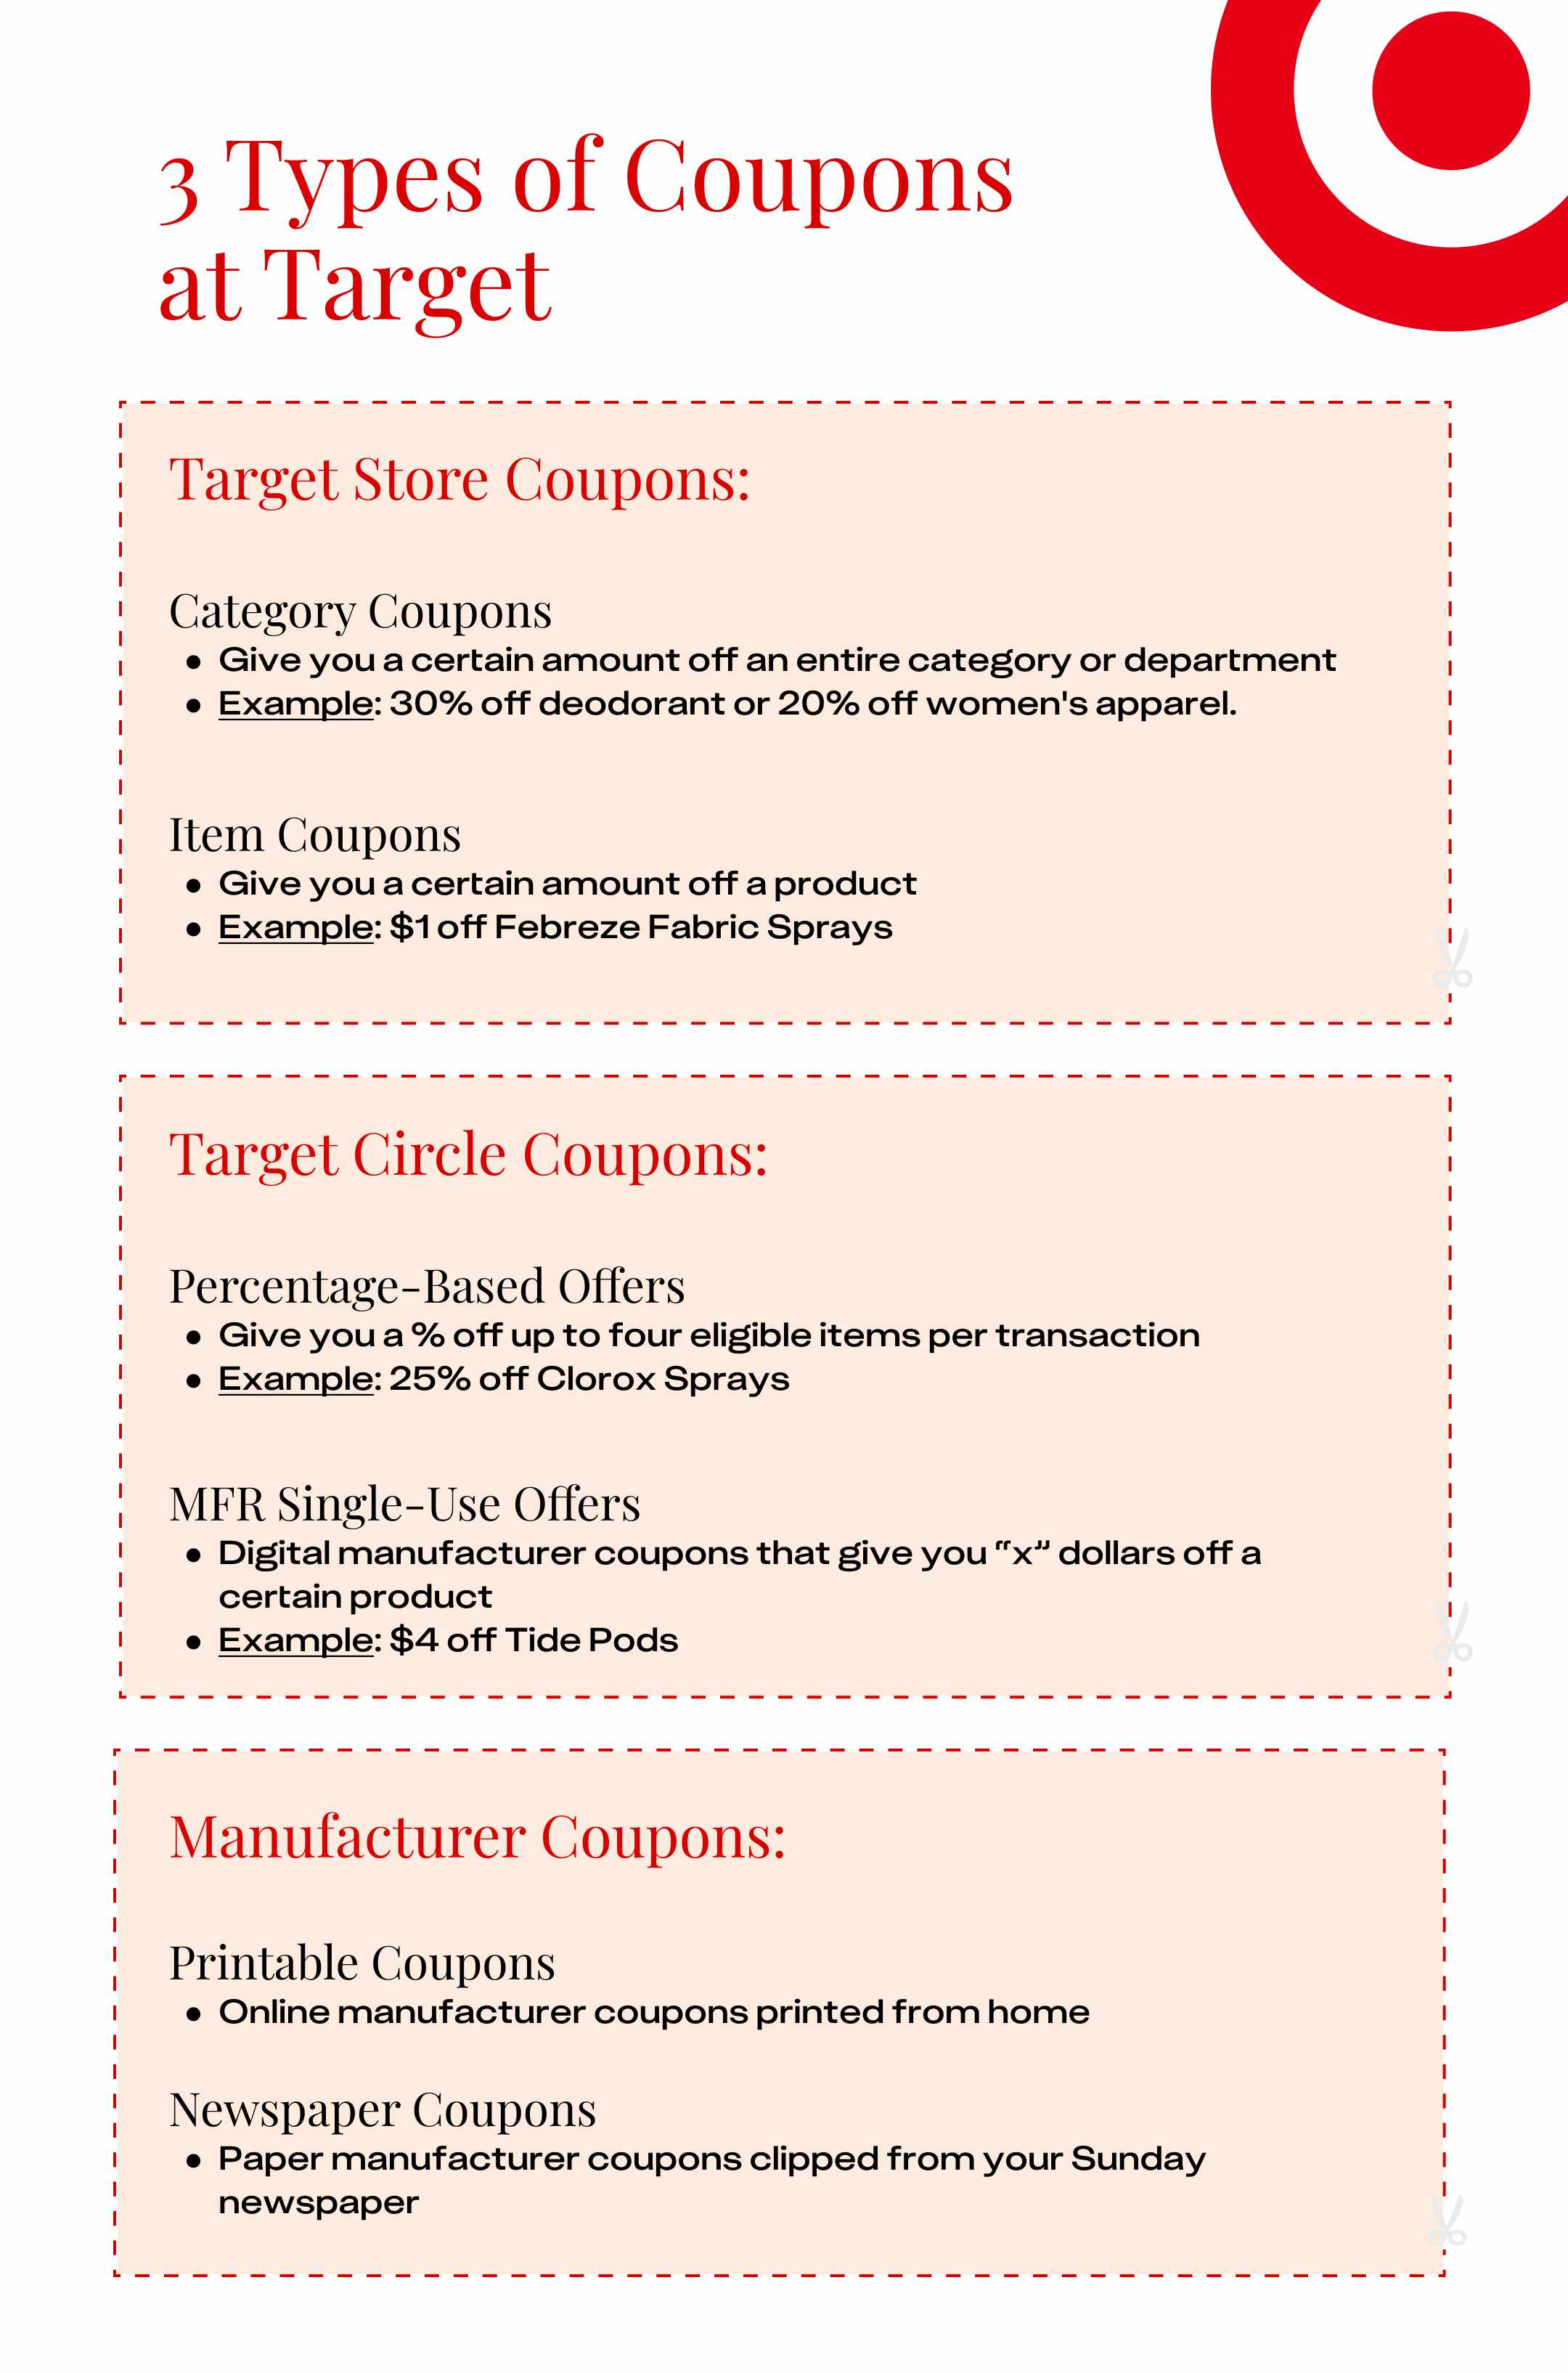 A graphic showing the three types of coupons to use at Target: Target store coupons (category coupons and item coupons), Target Circle Co...